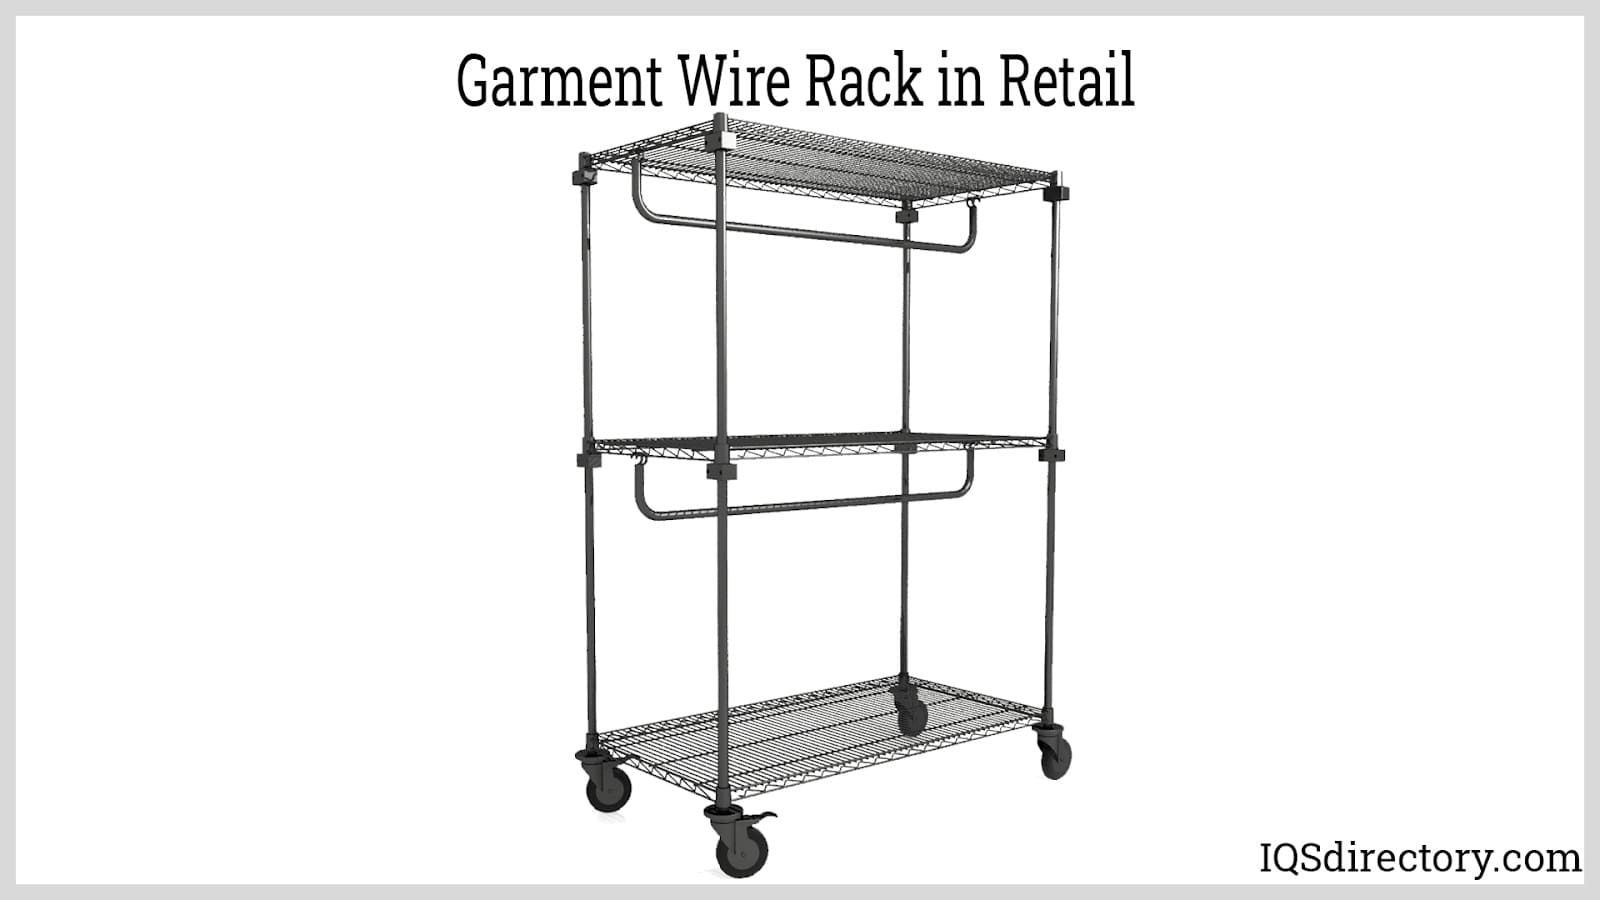 Wire Racks: Types, Materials, Applications, and Benefits